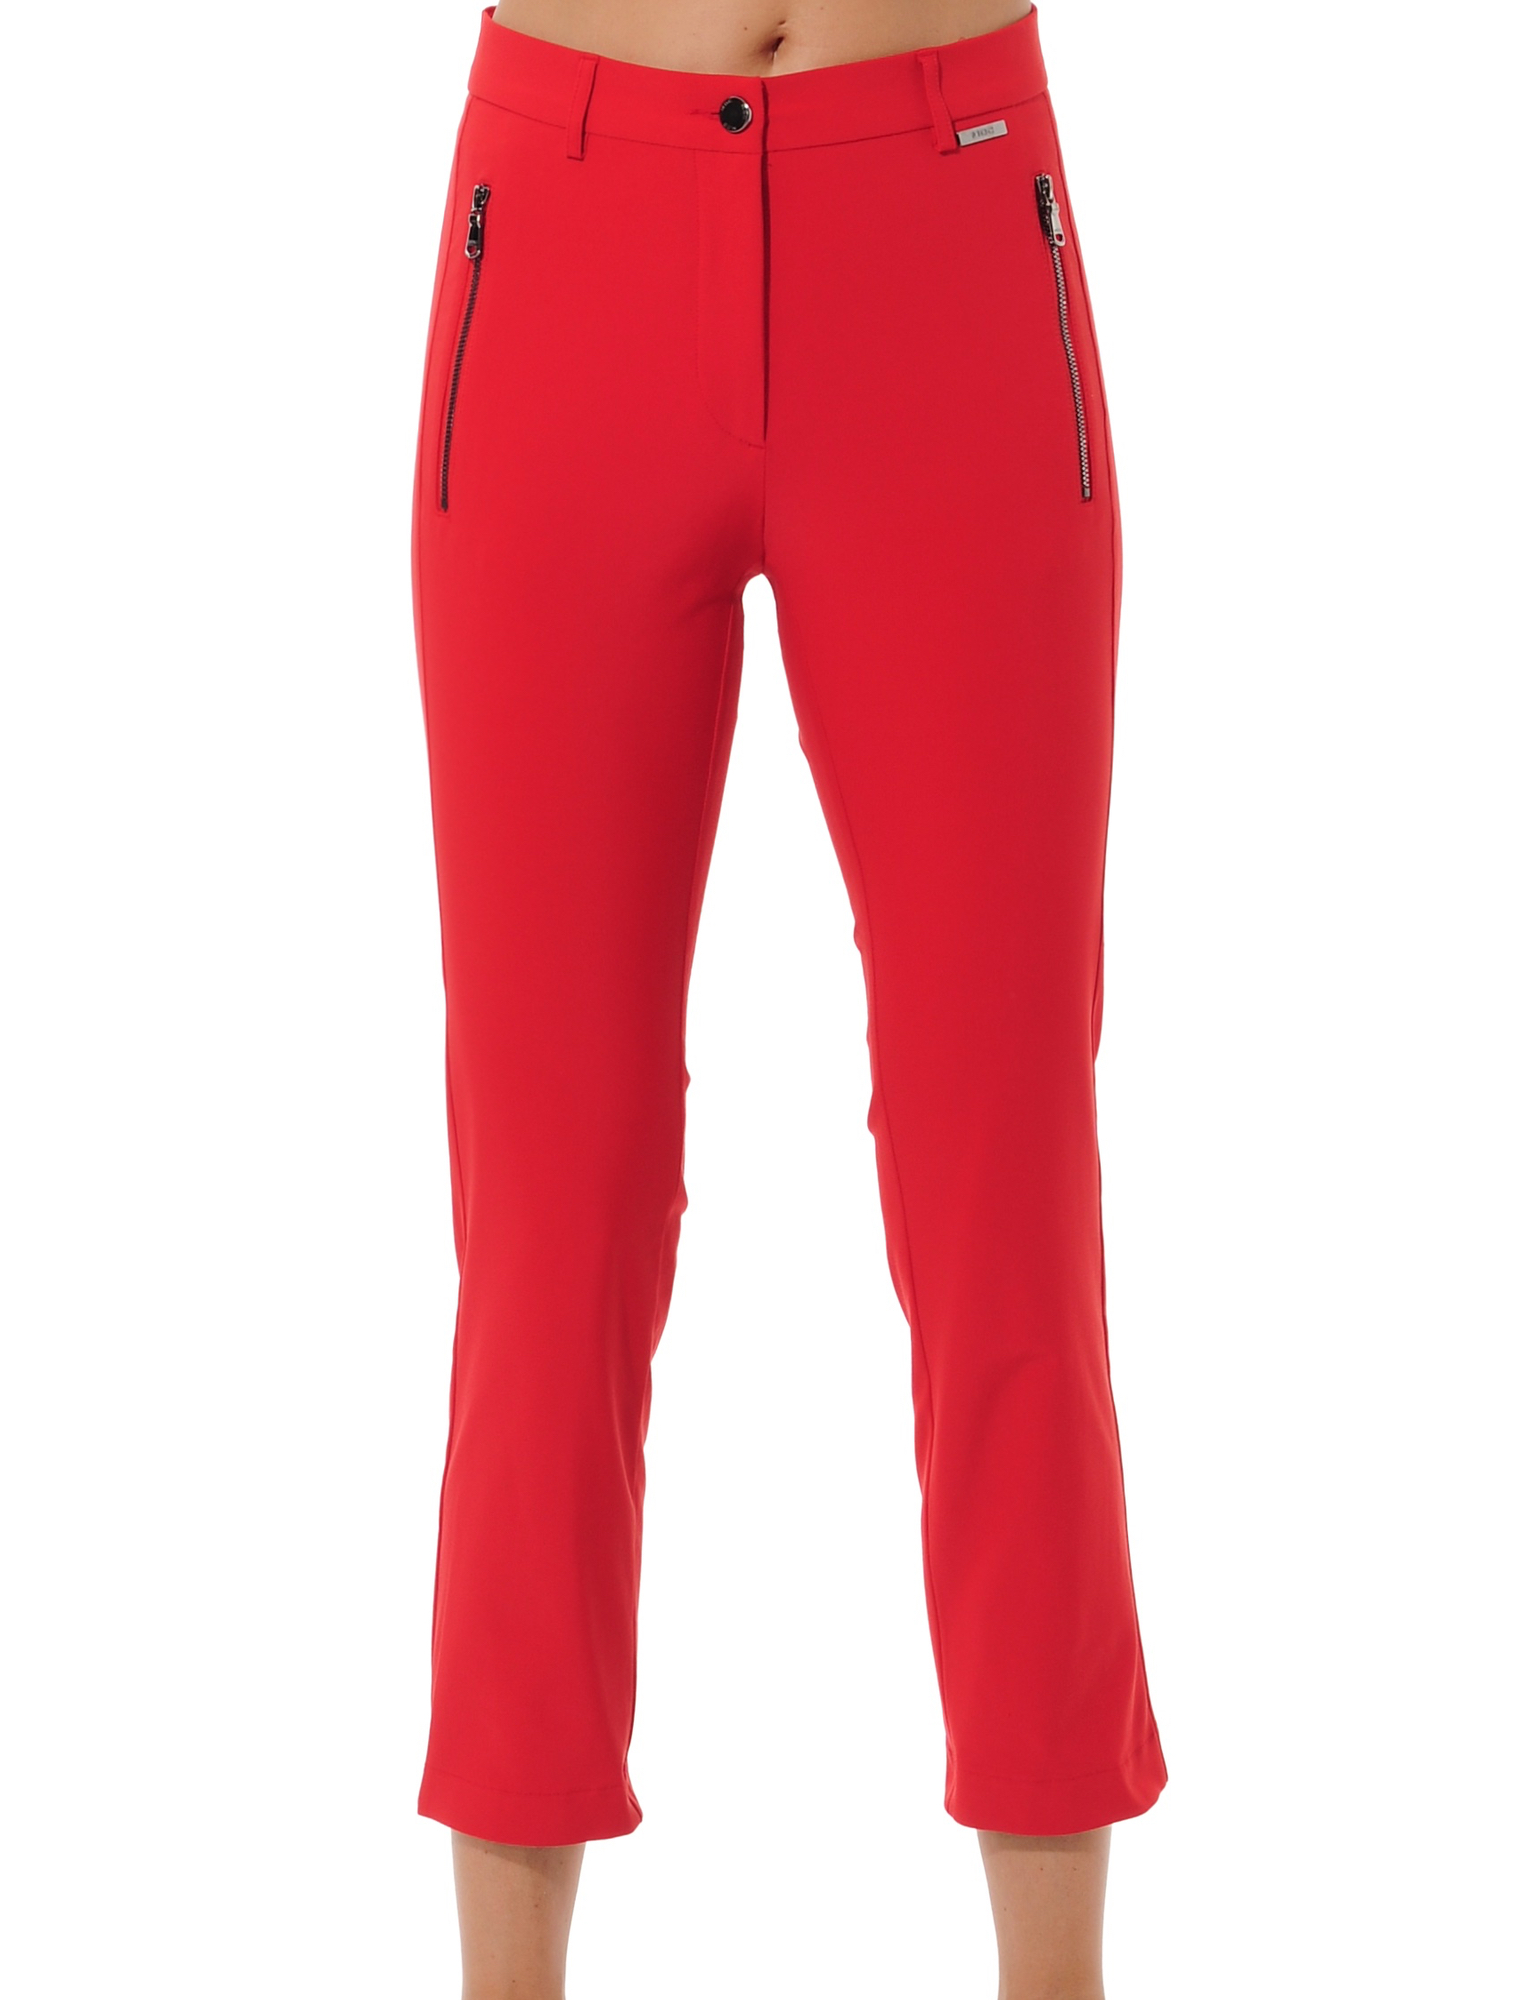 4way stretch cropped chinos red 